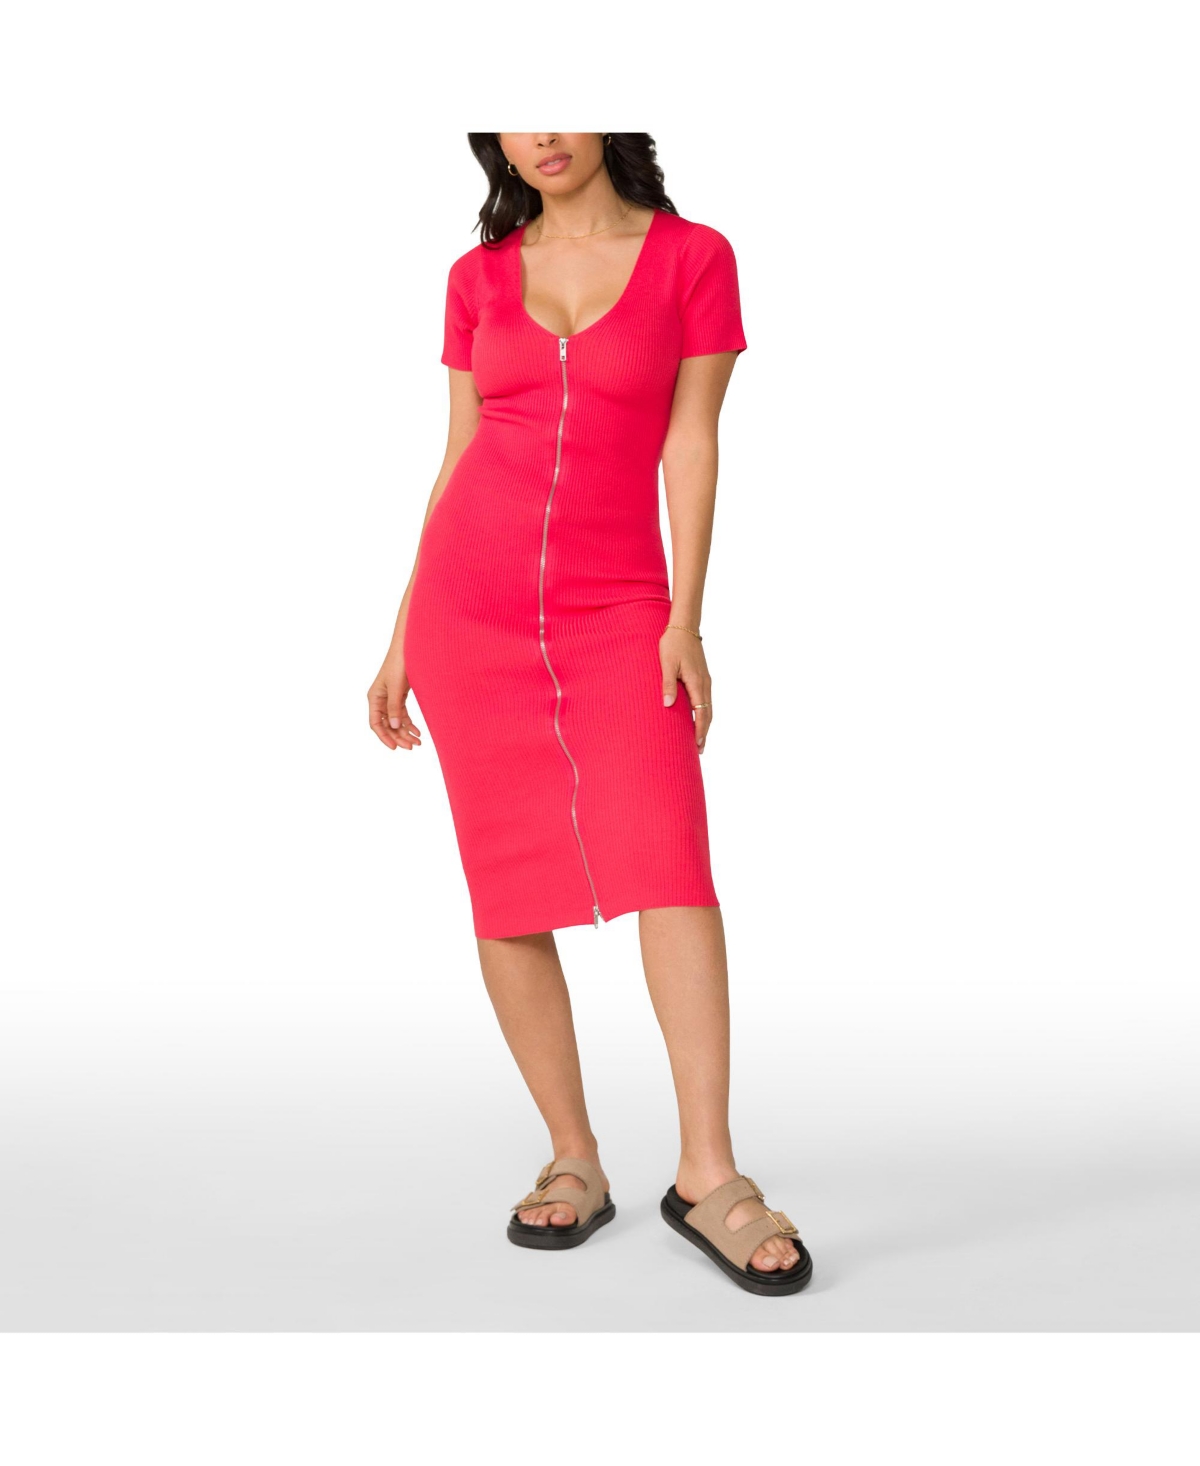 Women's Adult Women Cambria Dress - Coral